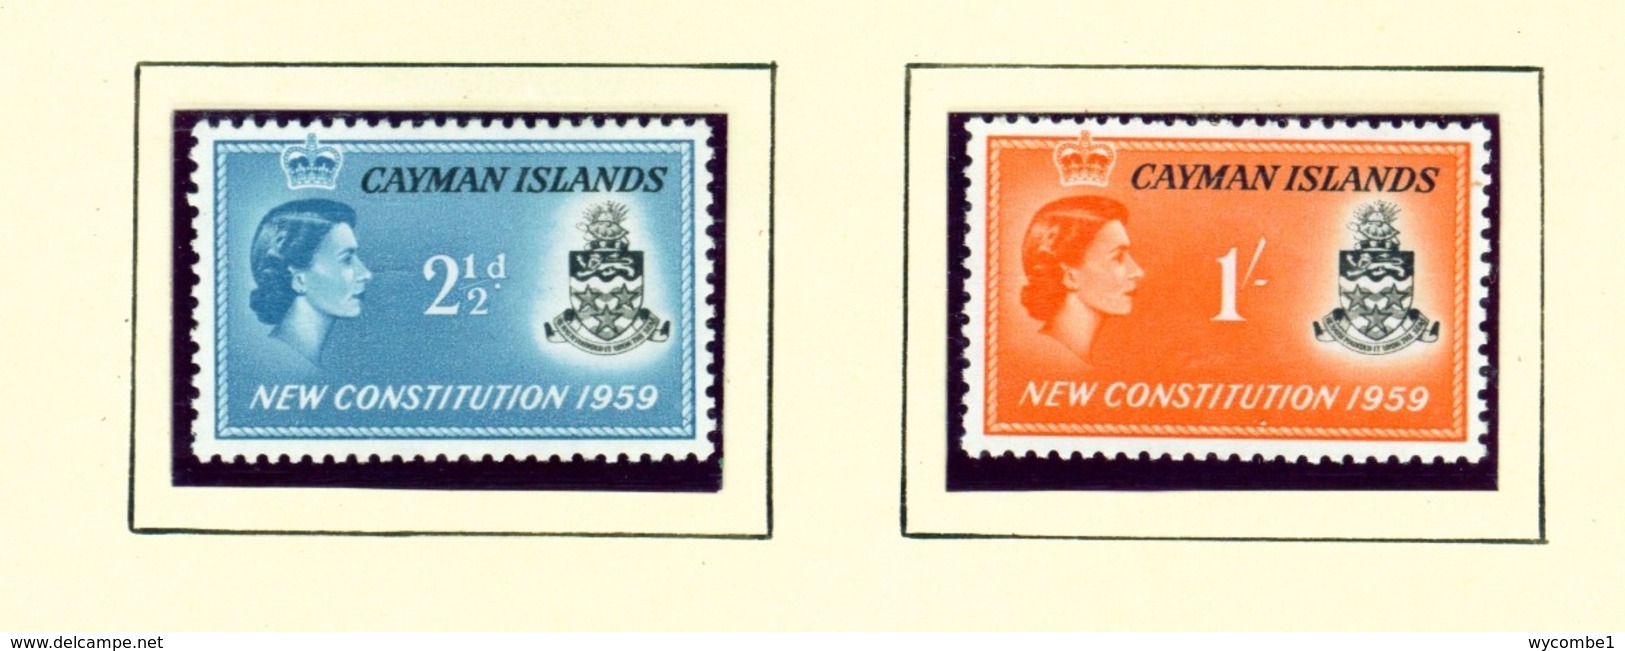 CAYMAN ISLANDS - 1959 New Constitution Set Unmounted/Never Hinged Mint - Cayman Islands